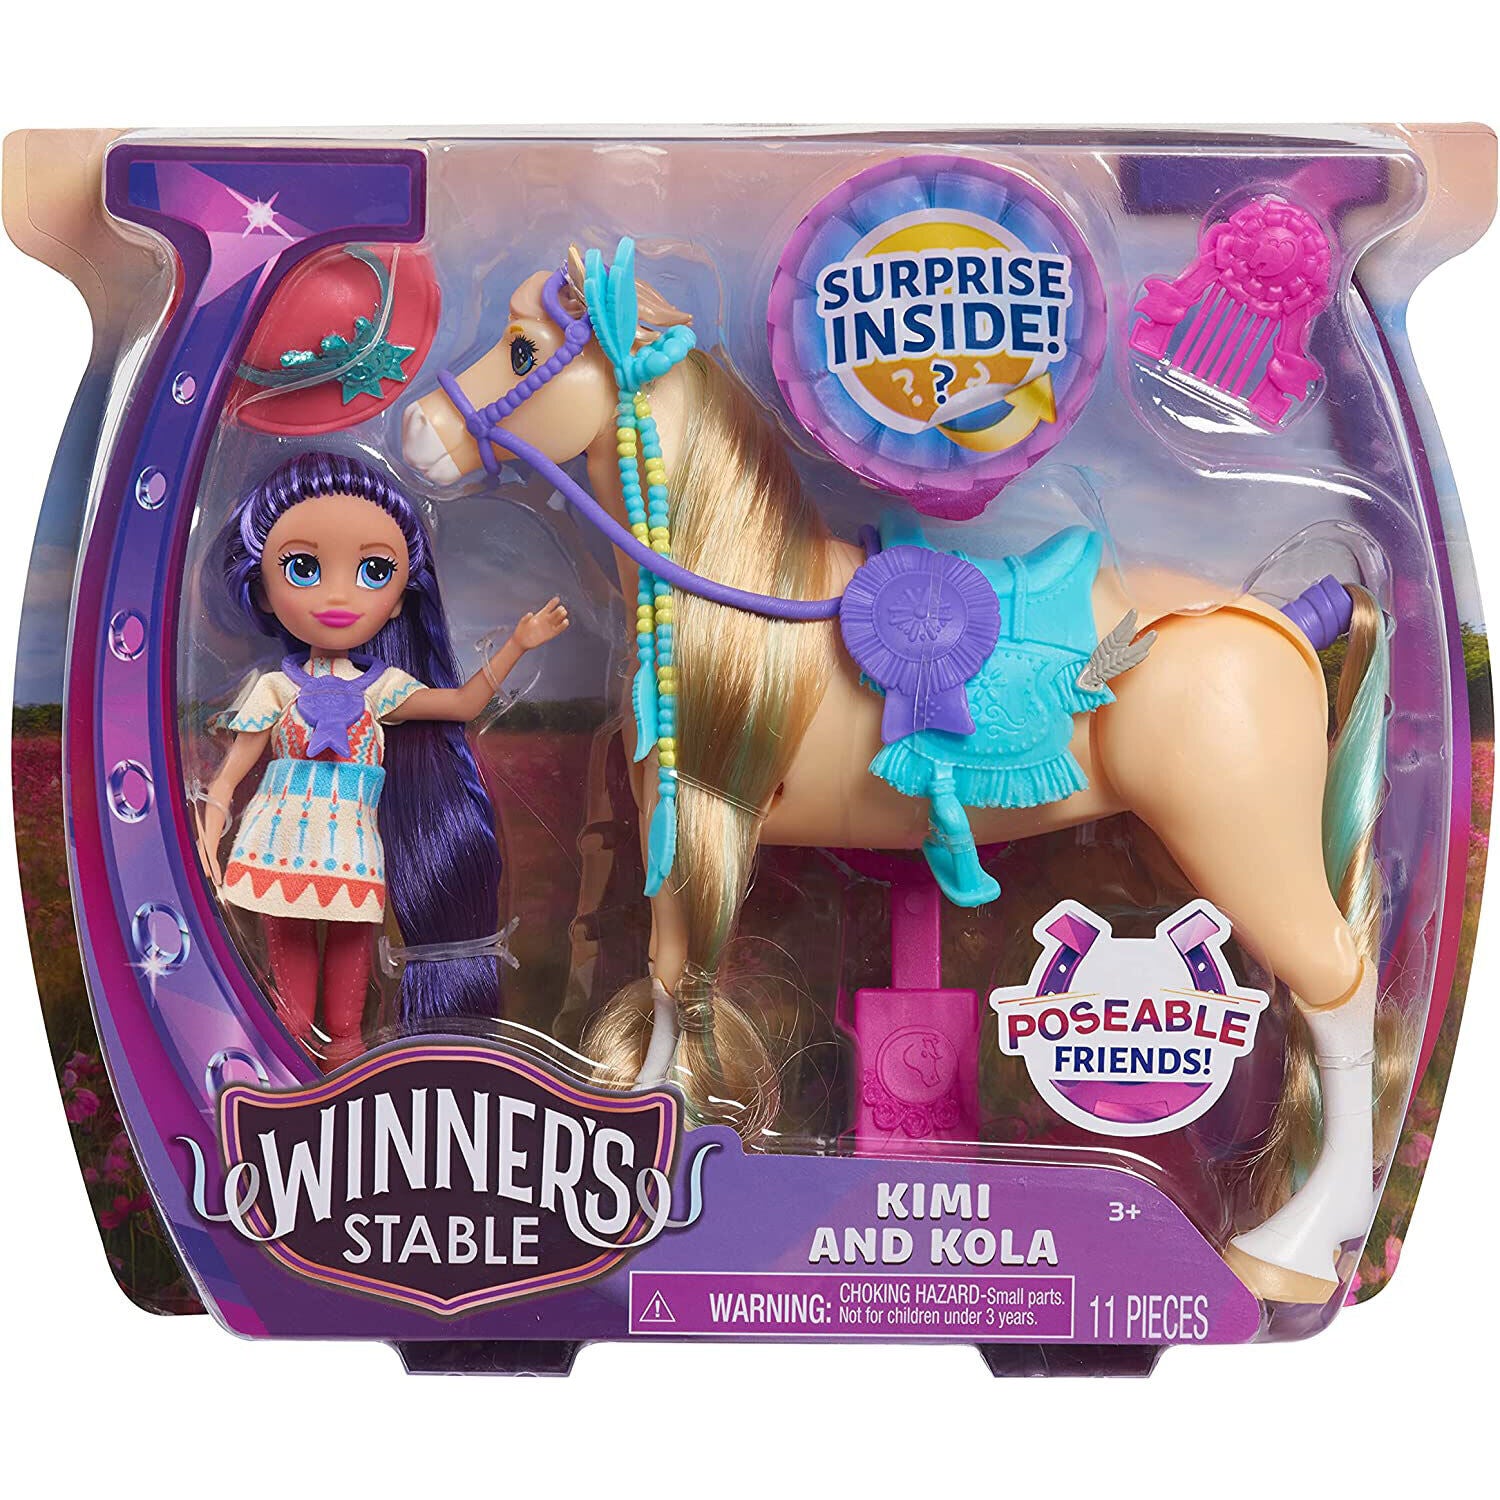 New Winner’s Stable Doll and Horse Set - Kimi and Kola - 11 Pieces